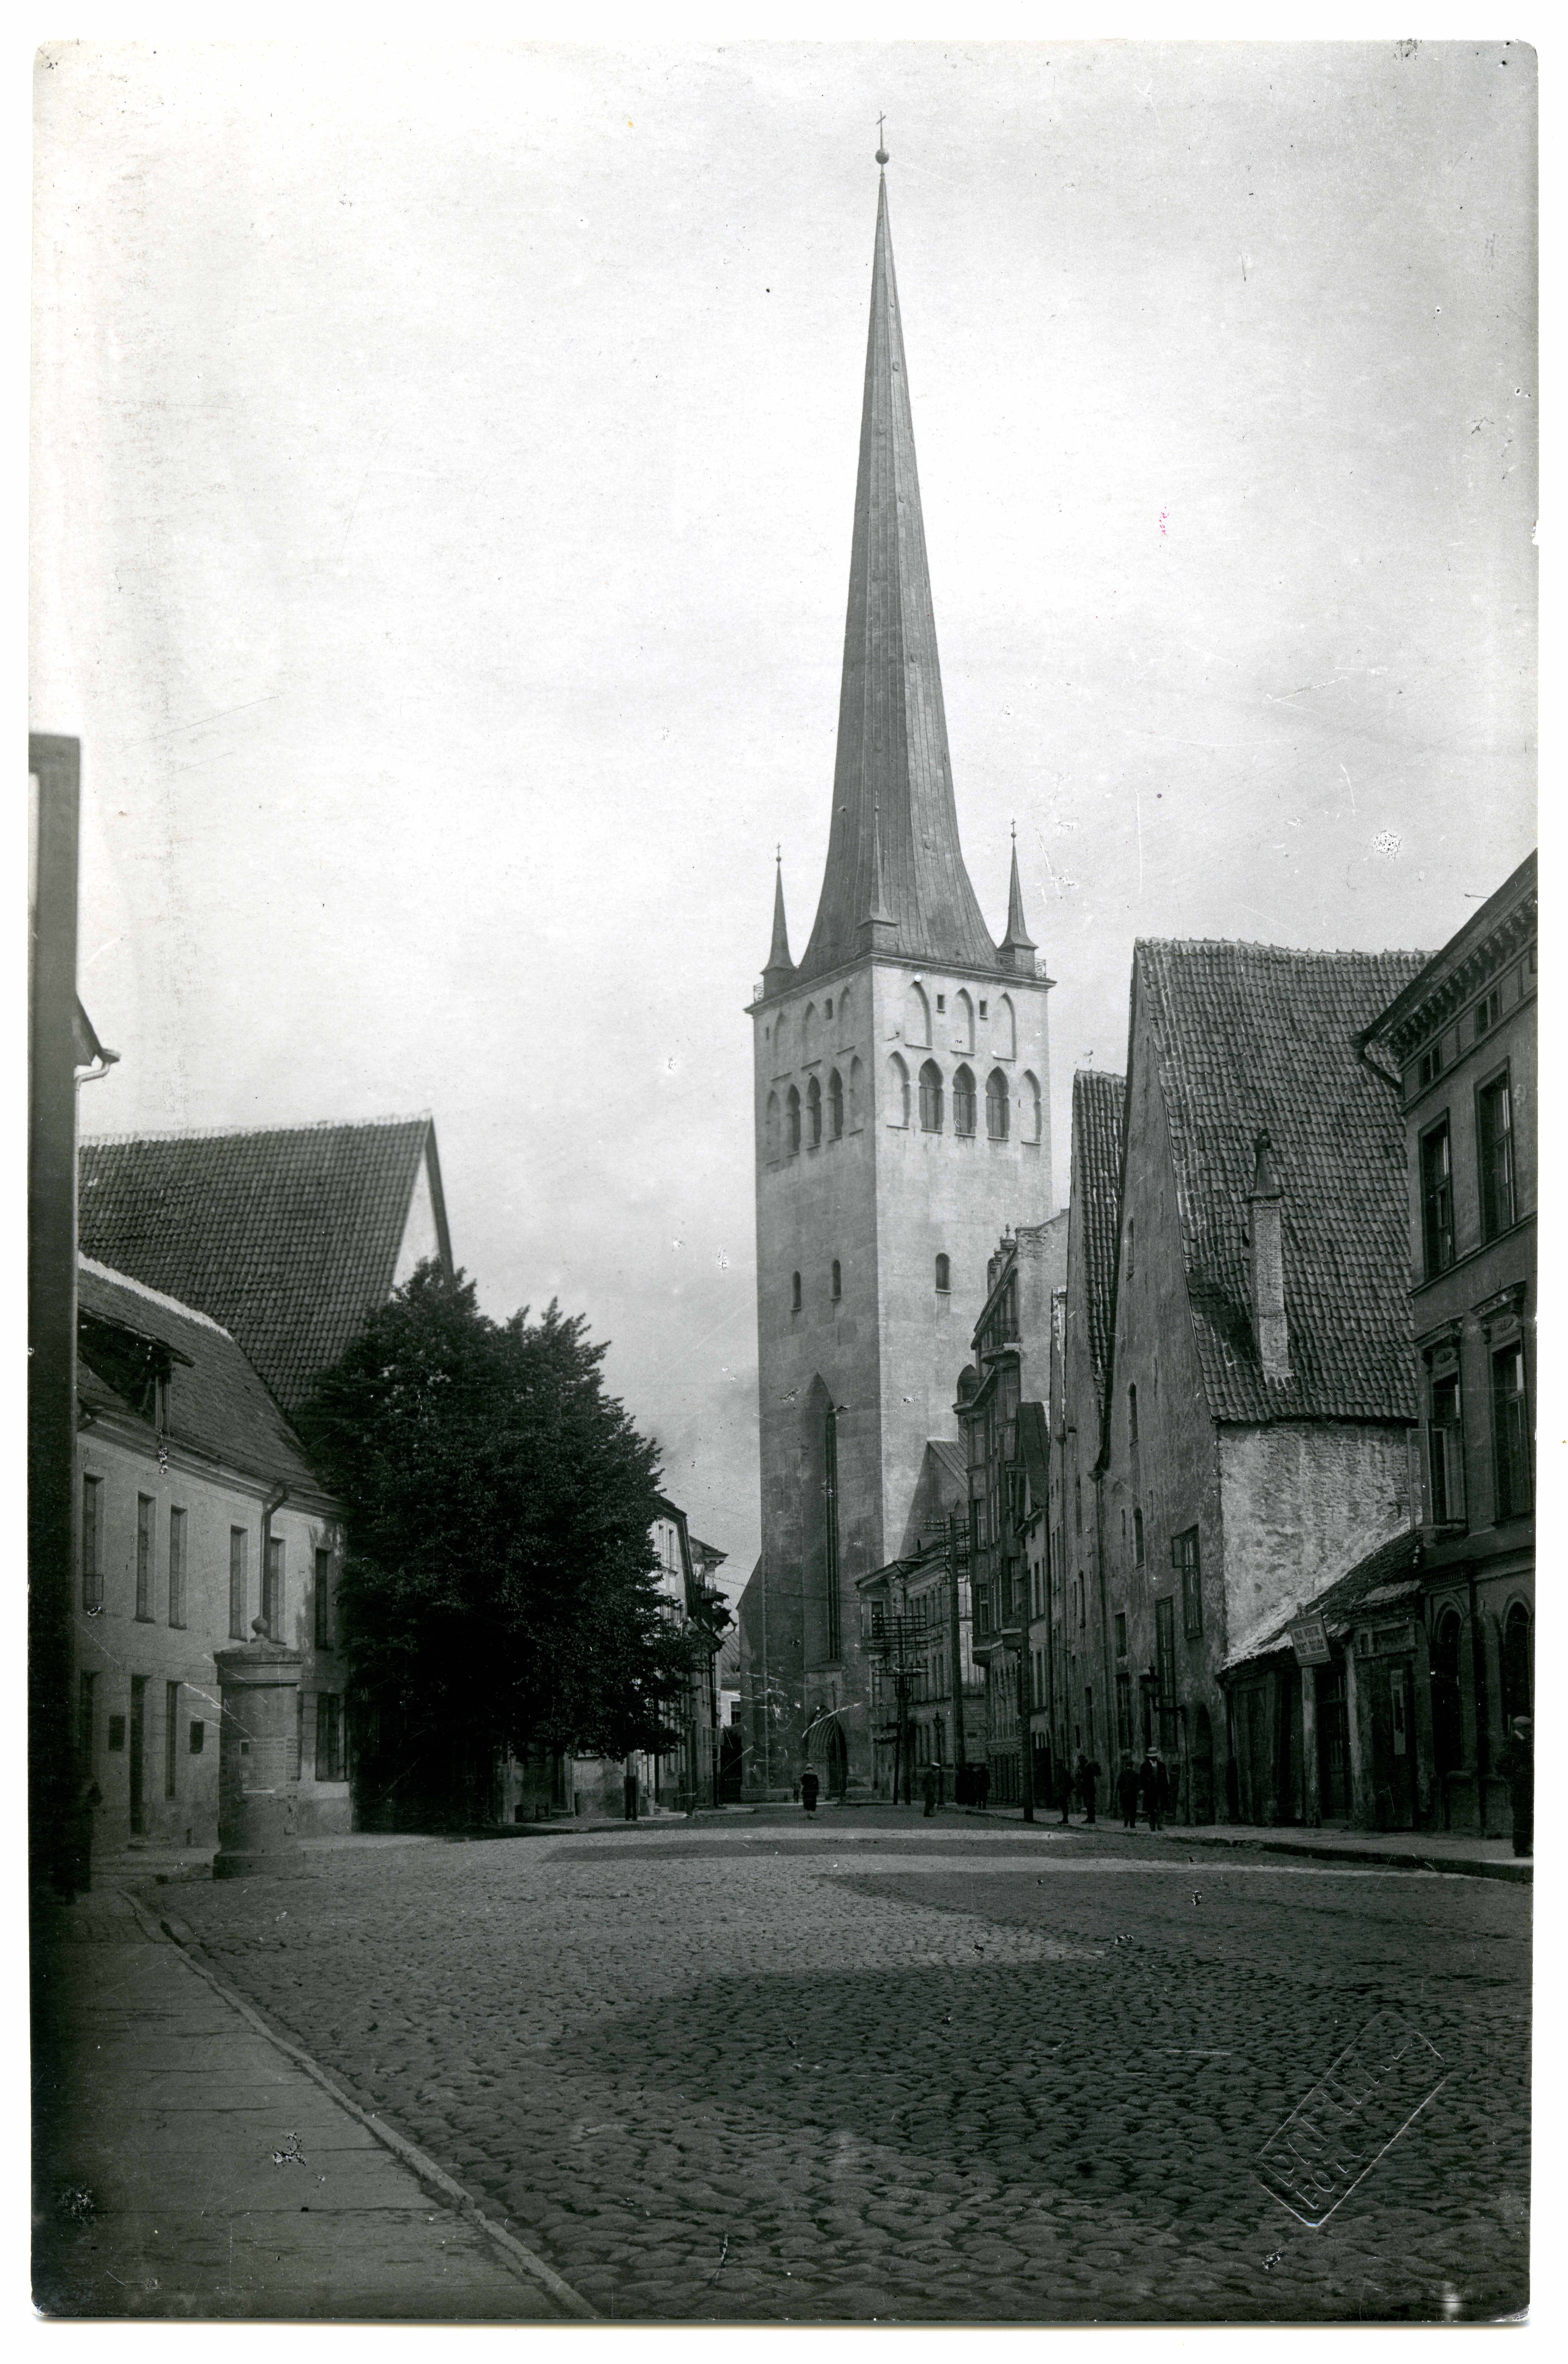 All-city. Oleviste Church. View to the tower from SW wide street